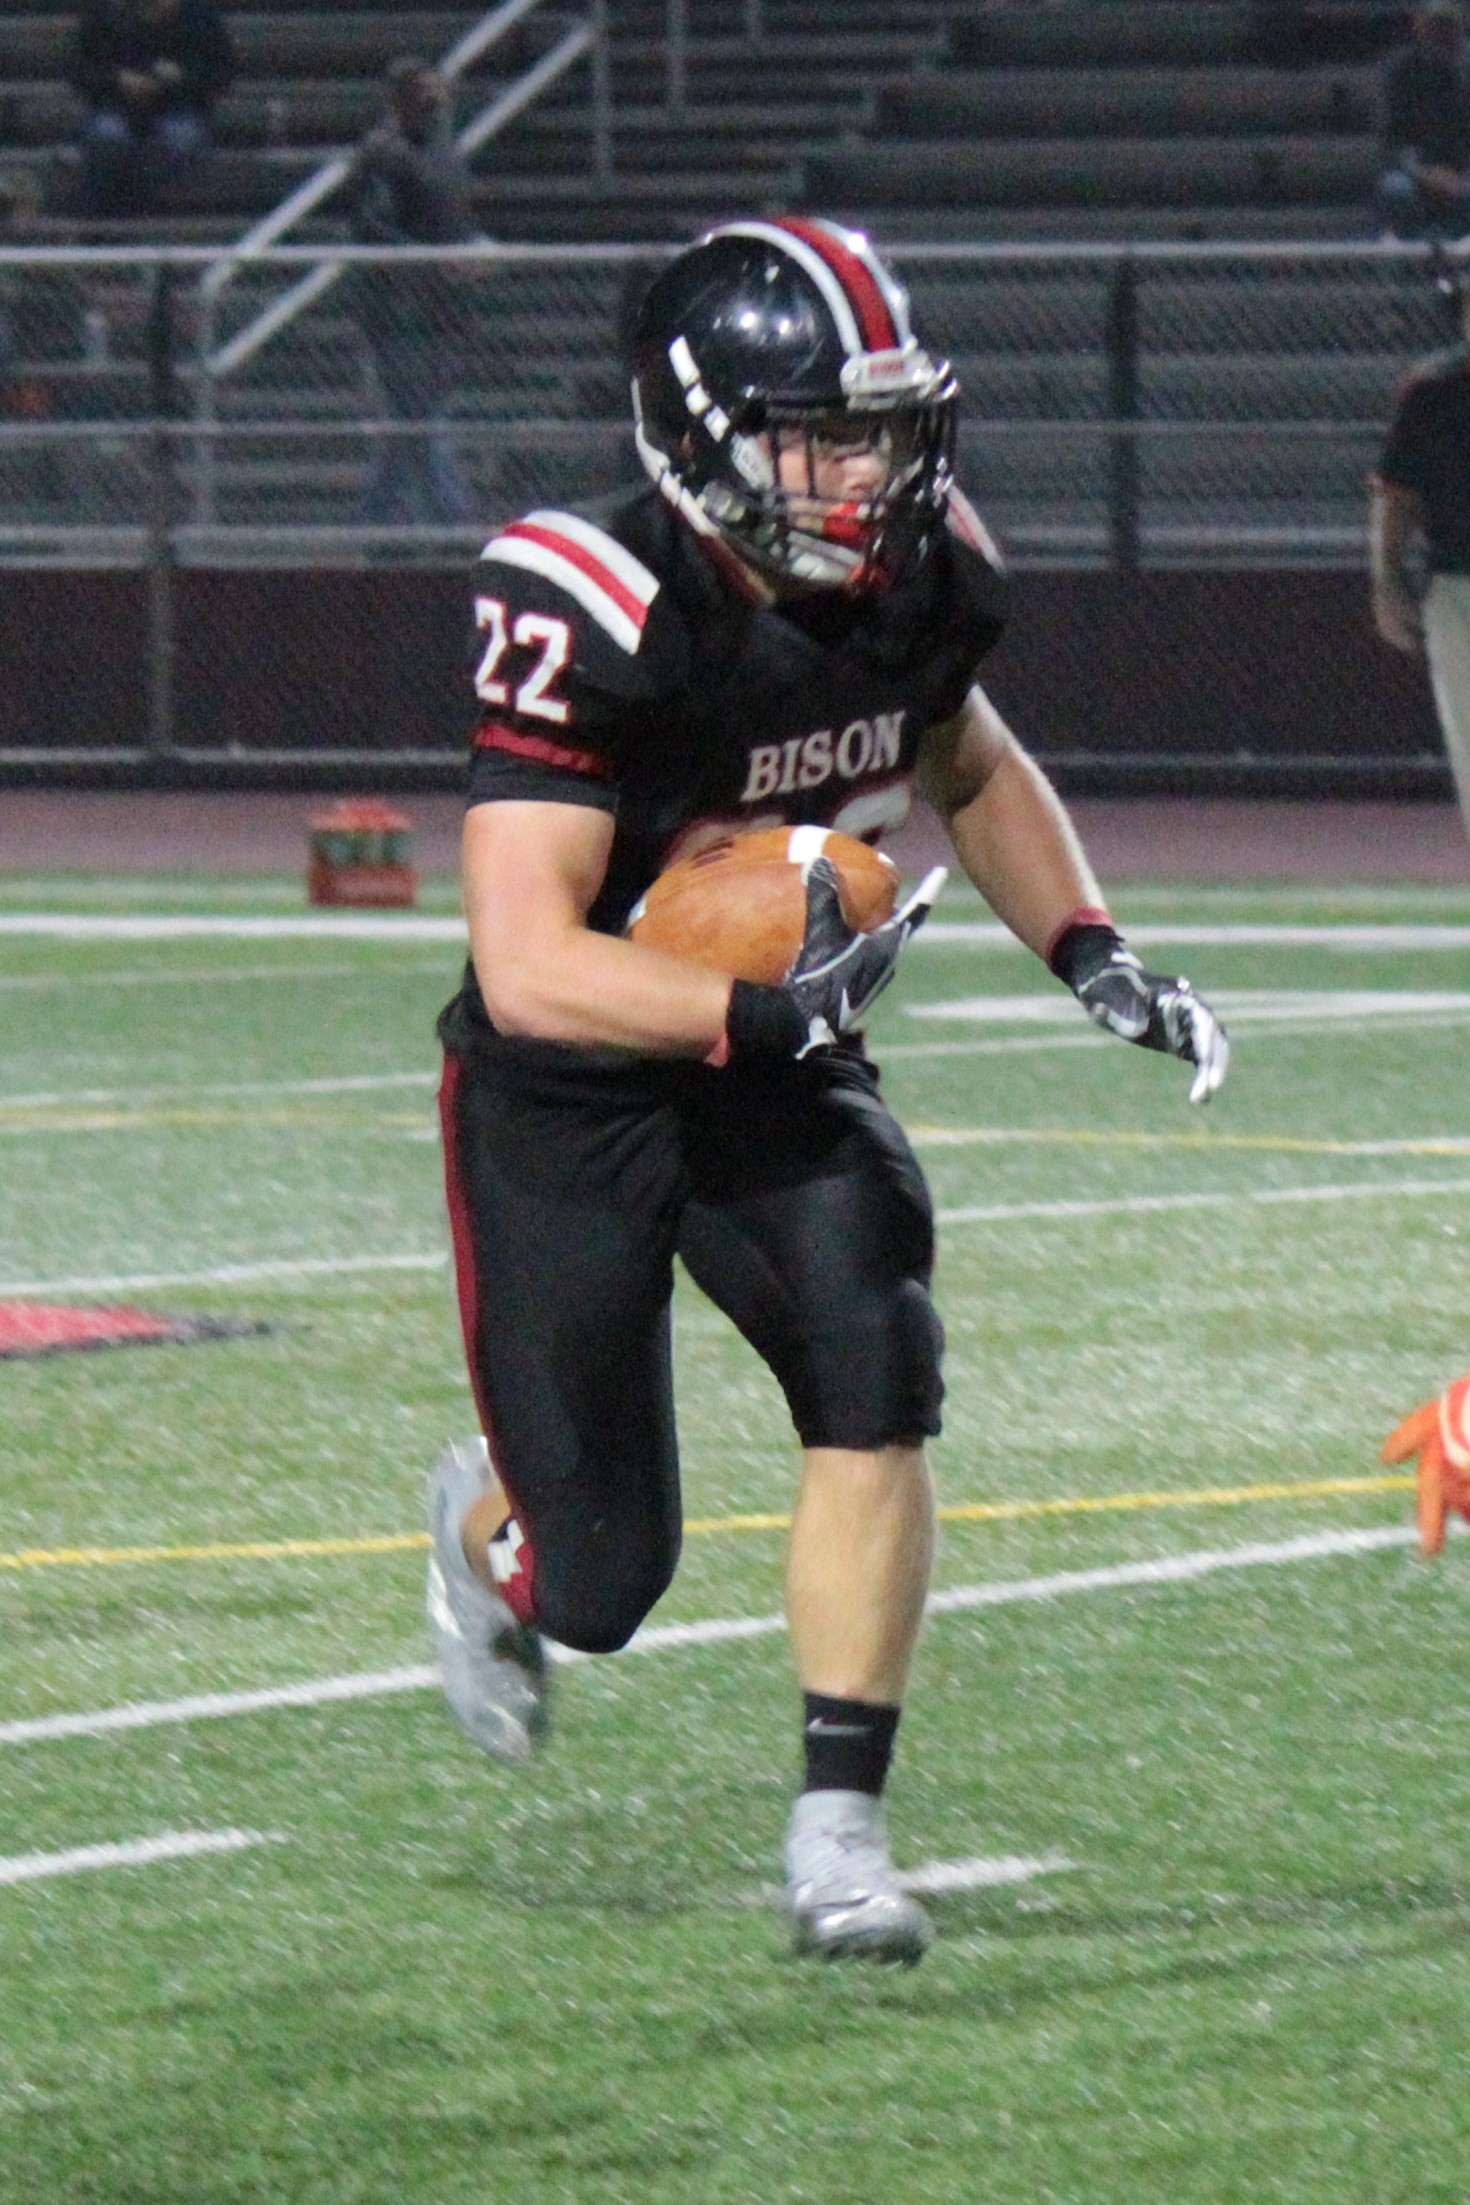 Ty Bender became the Bison workhorse against Tyrone, gaining 168 yards on 122 carries, accounting for over half Clearfield's offensive statistics.